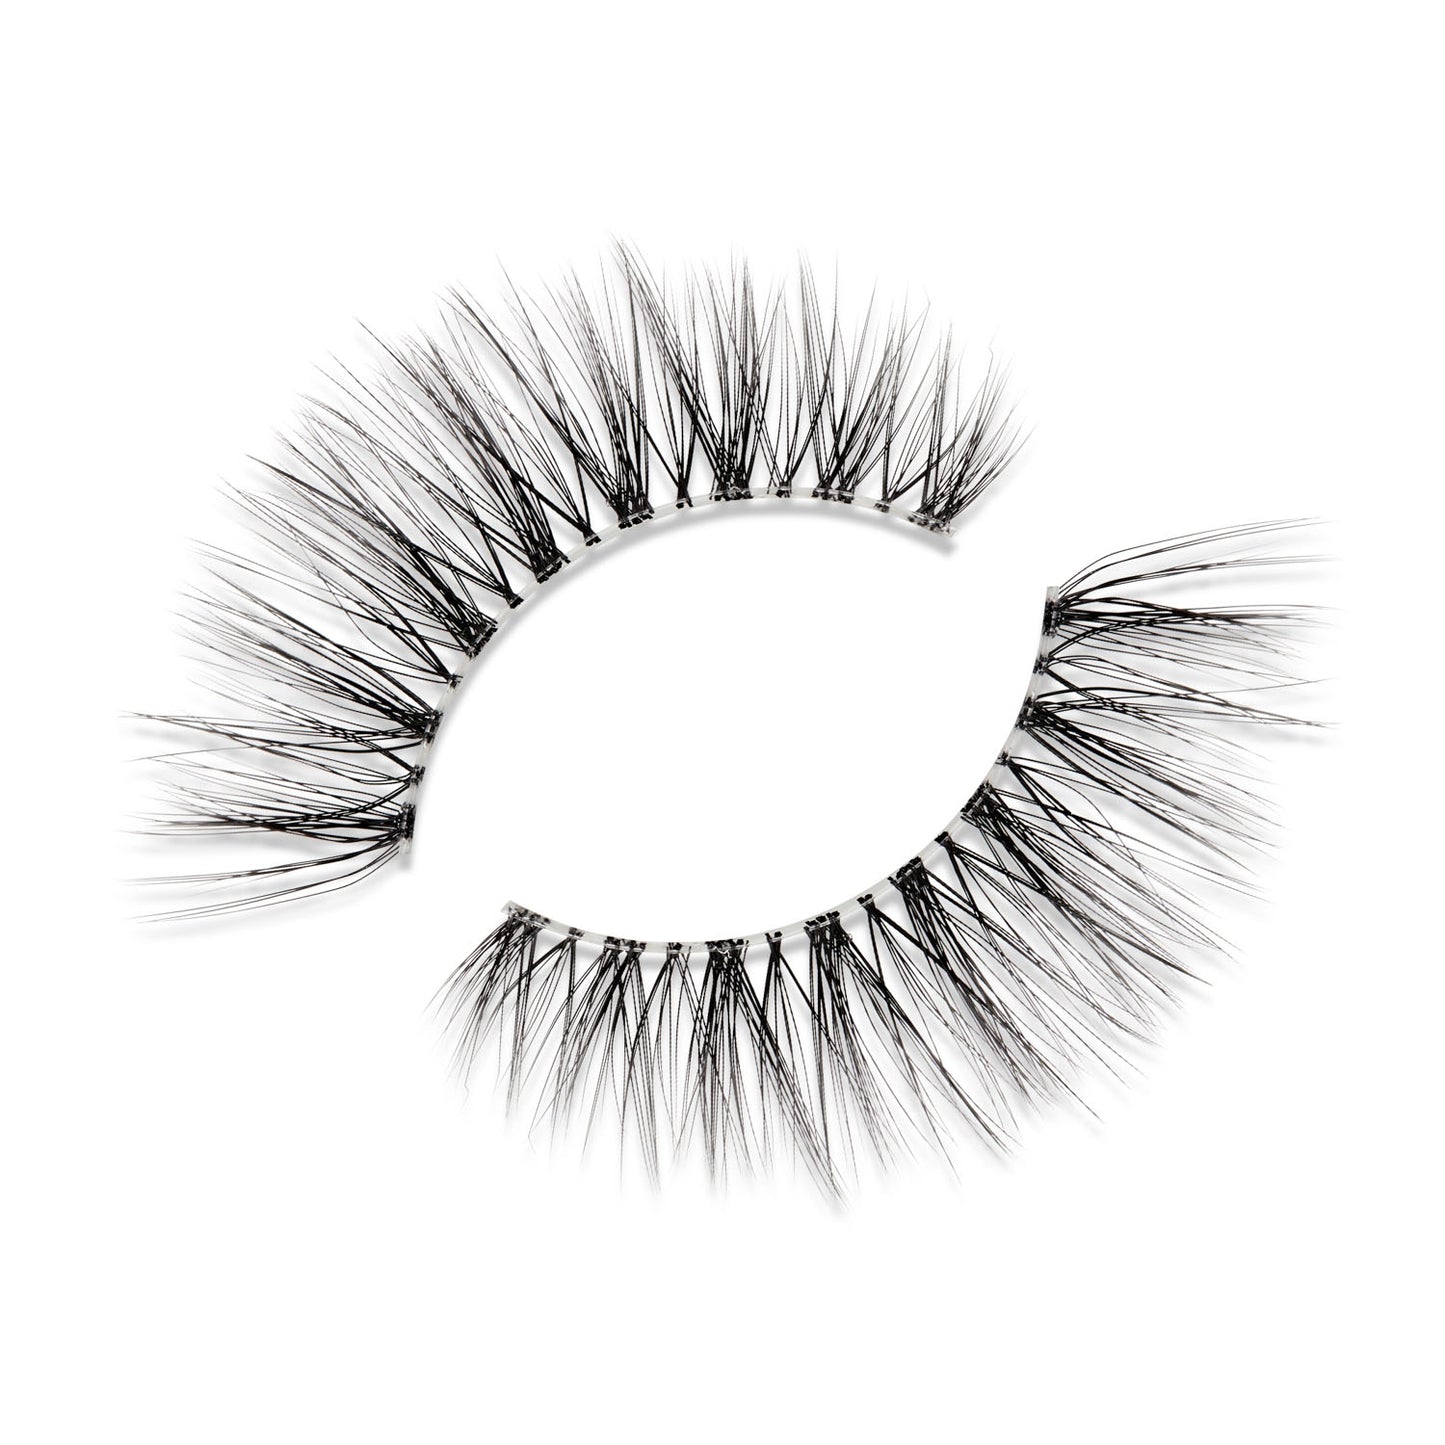 Professional (Dainty) Multi Layer Strip Lashes #D31.